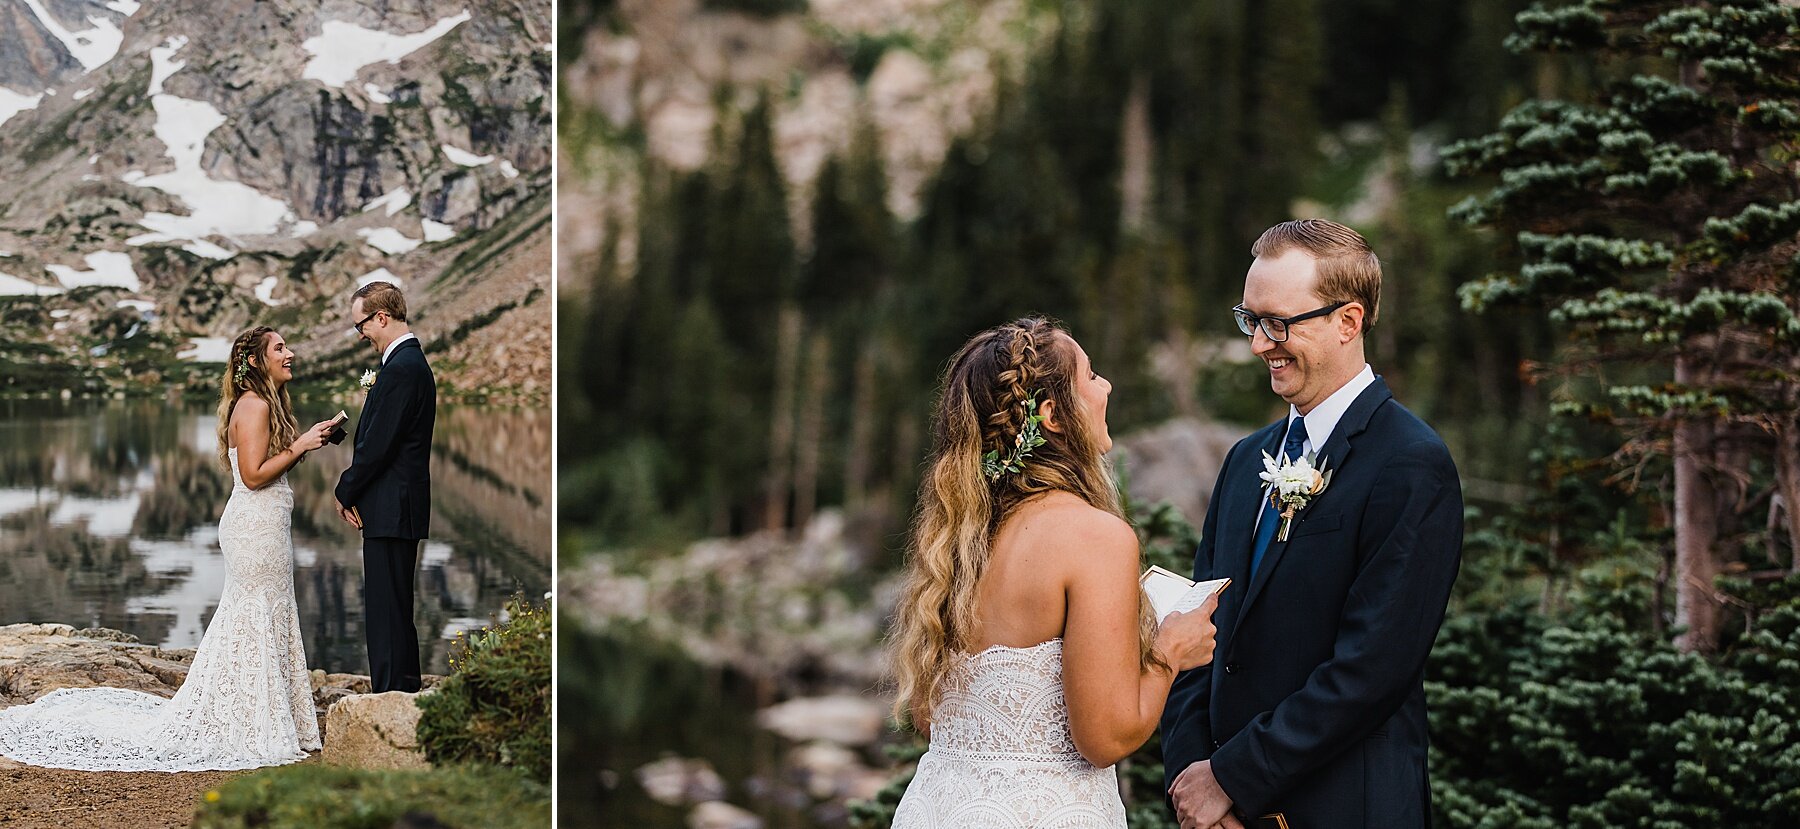 Sunrise Alpine Lake Elopement in the Mountains of Colorado | Vow